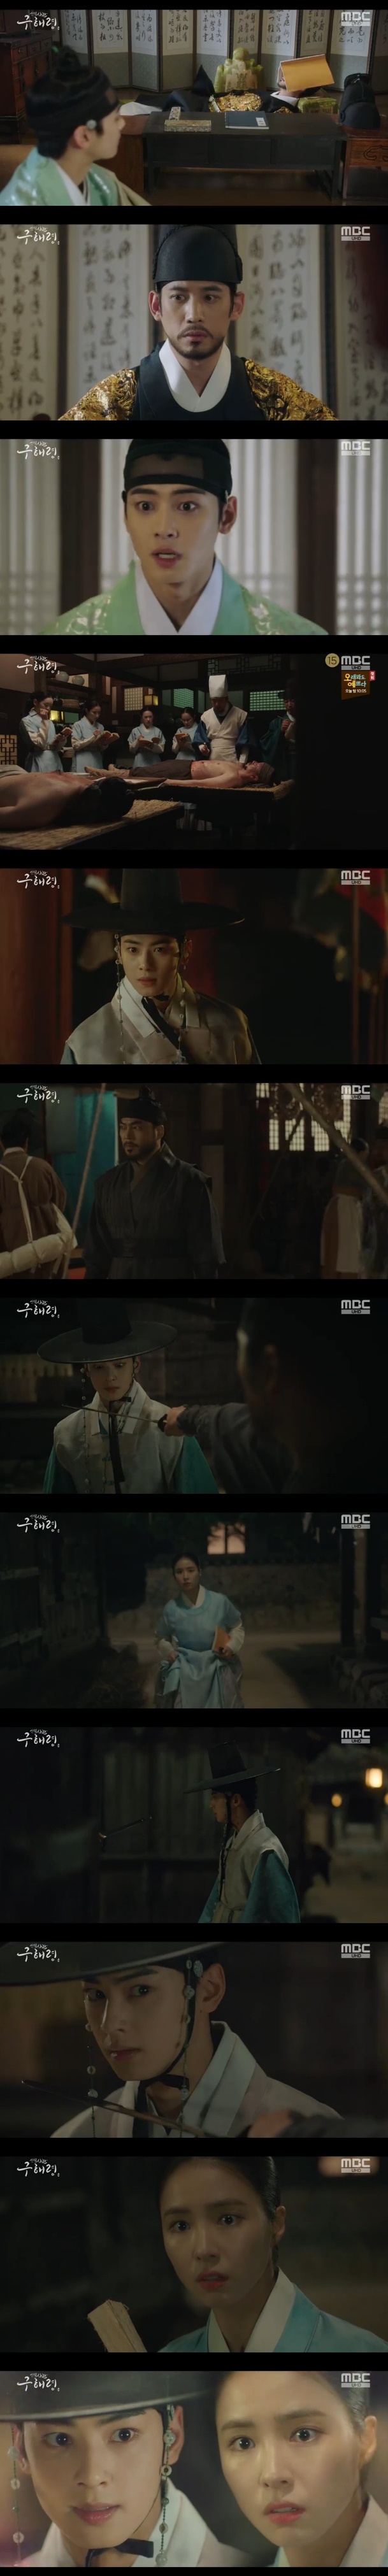 Seoul) = Na Hae-ryung Shin Se-kyung knew the identity of Jung Eun-woo.In the MBC drama Na Hae-ryung, which was broadcast on the afternoon of the 25th, Ada Lovelace Koo (Shin Se-kyung) heard that Lee Lim (Jung Eun-woo), who knew as an inner tube, was the second-ranked member of the throne.Lee Rim, who had previously been tit-for-tat with Koo Hae-ryung, lied to Koo Na Hae-ryung on the show.He was not a sejo of Joseon Mama, but a inner dress.Na Hae-ryung was fooled by the lie and followed his instructions. He cleaned every corner of the melted-down hall, but couldnt stand it anymore.I want to be honest, he said. What is your name, what is it that you have accumulated in me?Lee said, If you do not believe me, go and call Sejo of Joseon Mama.Na Hae-ryung laughed at his feet, saying to do it.In particular, Na Hae-ryung took the weakness of Irims inner tube, and looked him up and down, saying, Im sorry for the insults of the plum novels.At that time, I thought why I was wasting paper, but now I think I wanted to feel the affection of men and women. Na Hae-ryung left, teasing, I see it now, I understand it, come on, come on! Irim was greatly embarrassed, saying, No, no, no, no!I was unhappy and laughed.Na Hae-ryung began to learn the work of the sergeant in earnest. Min Woo-won (Lee Ji-hoon) taught Ada Lovelace, including Na Hae-ryung.Binary was disturbed by the mediation, and she was reported to have been killed by a lung murder. Six men died, one of them survived with a strange medical technique.Lee Rim, who overheard this, secretly visited the scene of the incident when he was surprised when the Hodam Teachers Exhibition was mentioned, all of which were done by Min Ik-pyeong (Choi Duk-moon).Ada Lovelace, including Na Hae-ryung, went to the autopsy. Na Hae-ryung said, He wants to see me.Its not a hideous thing, its like a suture, its a Western medicine, and its actually said that stitching is better. I actually wanted to see it.But I heard only bitter words from my senior officer.At this point, Irim identified the body, but when he was alive, he did not breathe, and a man who had just escaped the scene was suspected and followed him.After that, Irims actions were discovered and he was in danger of dying. Na Hae-ryung was on his way home and headed back to the bank.Who are you? Irim replied, I am the Sejo of Joseon, the prince of Joseon in this country. Can you really bend me?Na Hae-ryung, who was in the same space, heard this and eventually found out who he was.Meanwhile, Na Hae-ryung, a drama about the first problematic Ada Lovelace () of Joseon and the Phil full romance annals of Prince Irim, the anti-war mother Solo, will be broadcast every Wednesday and Thursday at 8:55 pm.